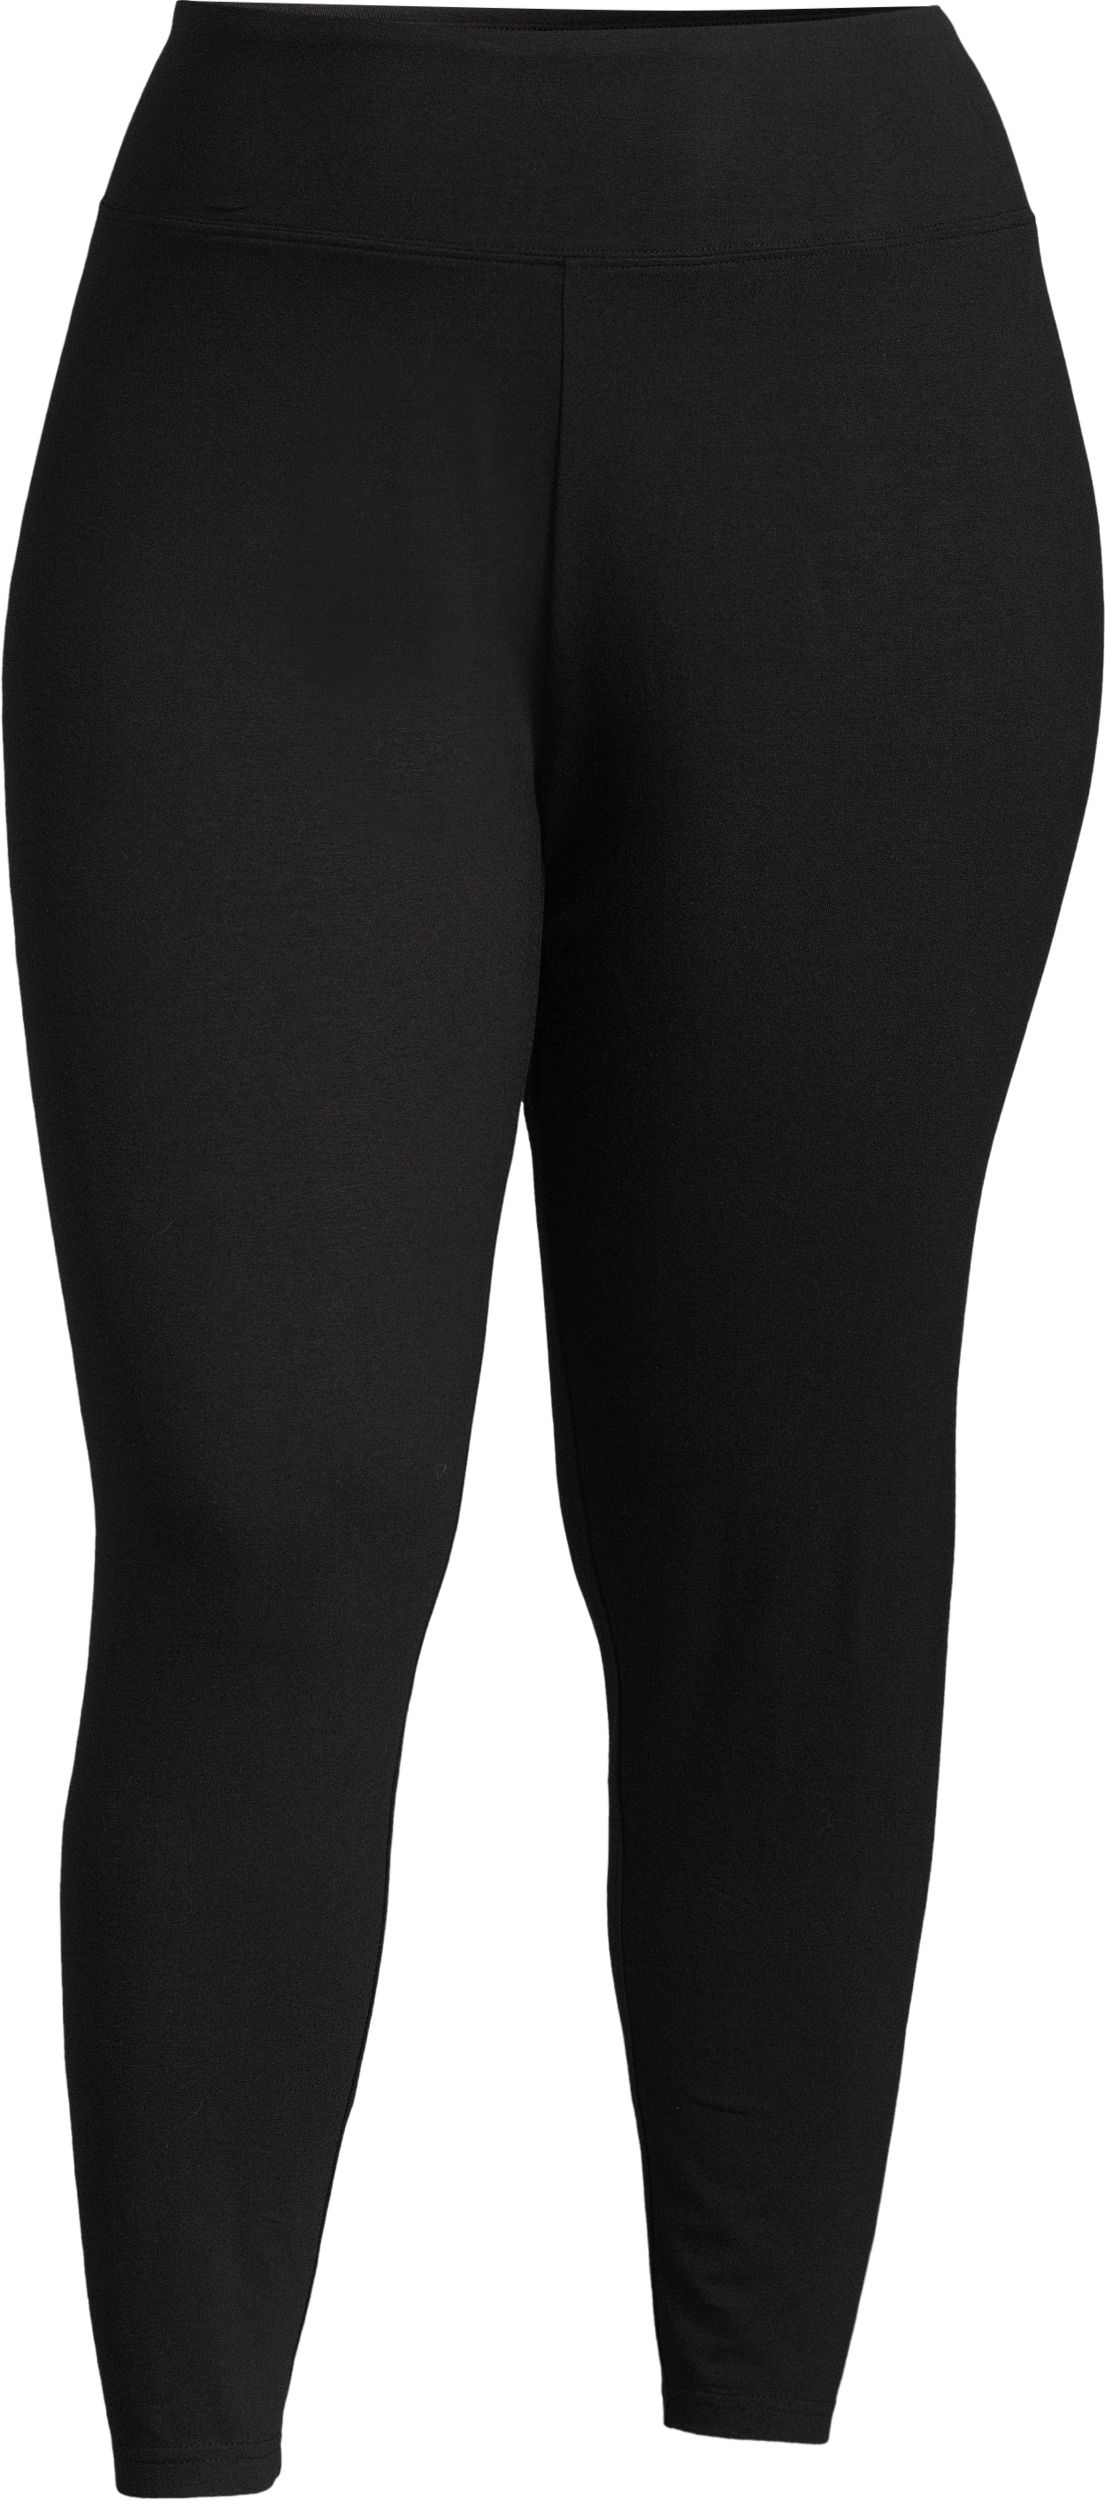 Ripzone Women's Eira High Waisted Leggings, Pants, Casual, Stretch